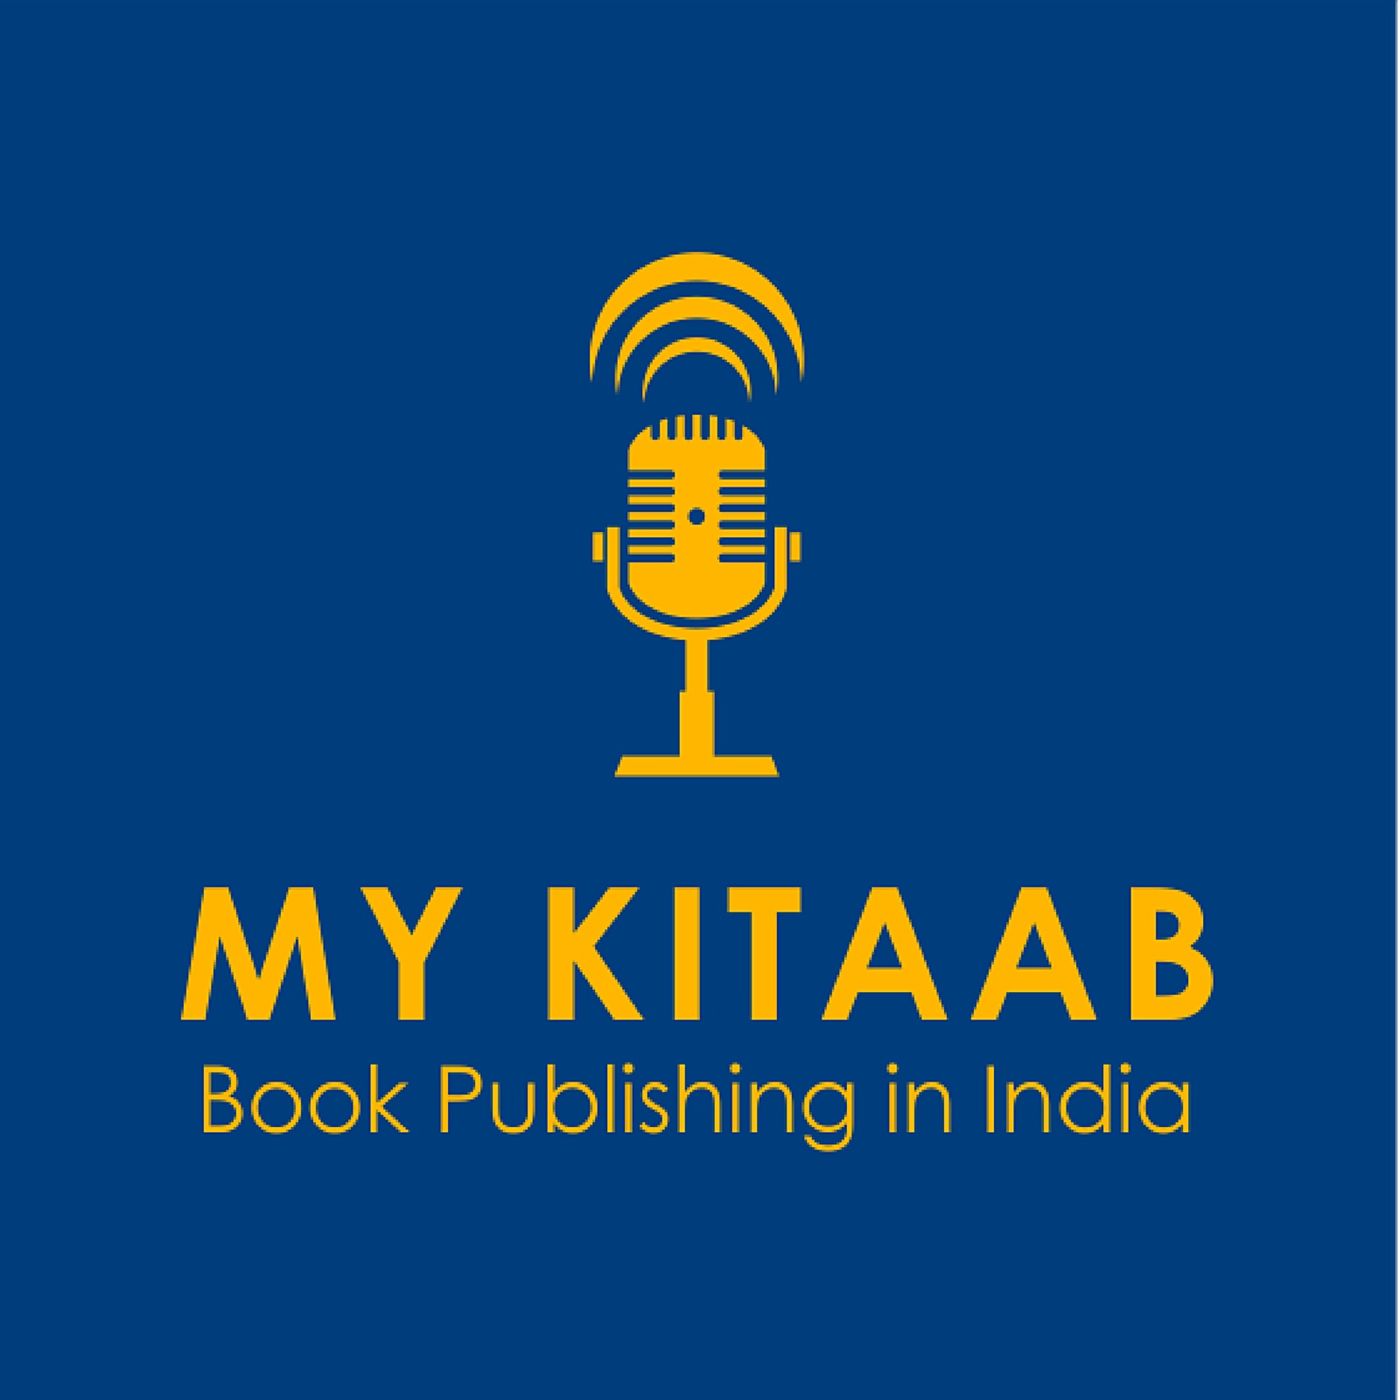 Introduction to MyKitaab Podcast by Amar Vyas